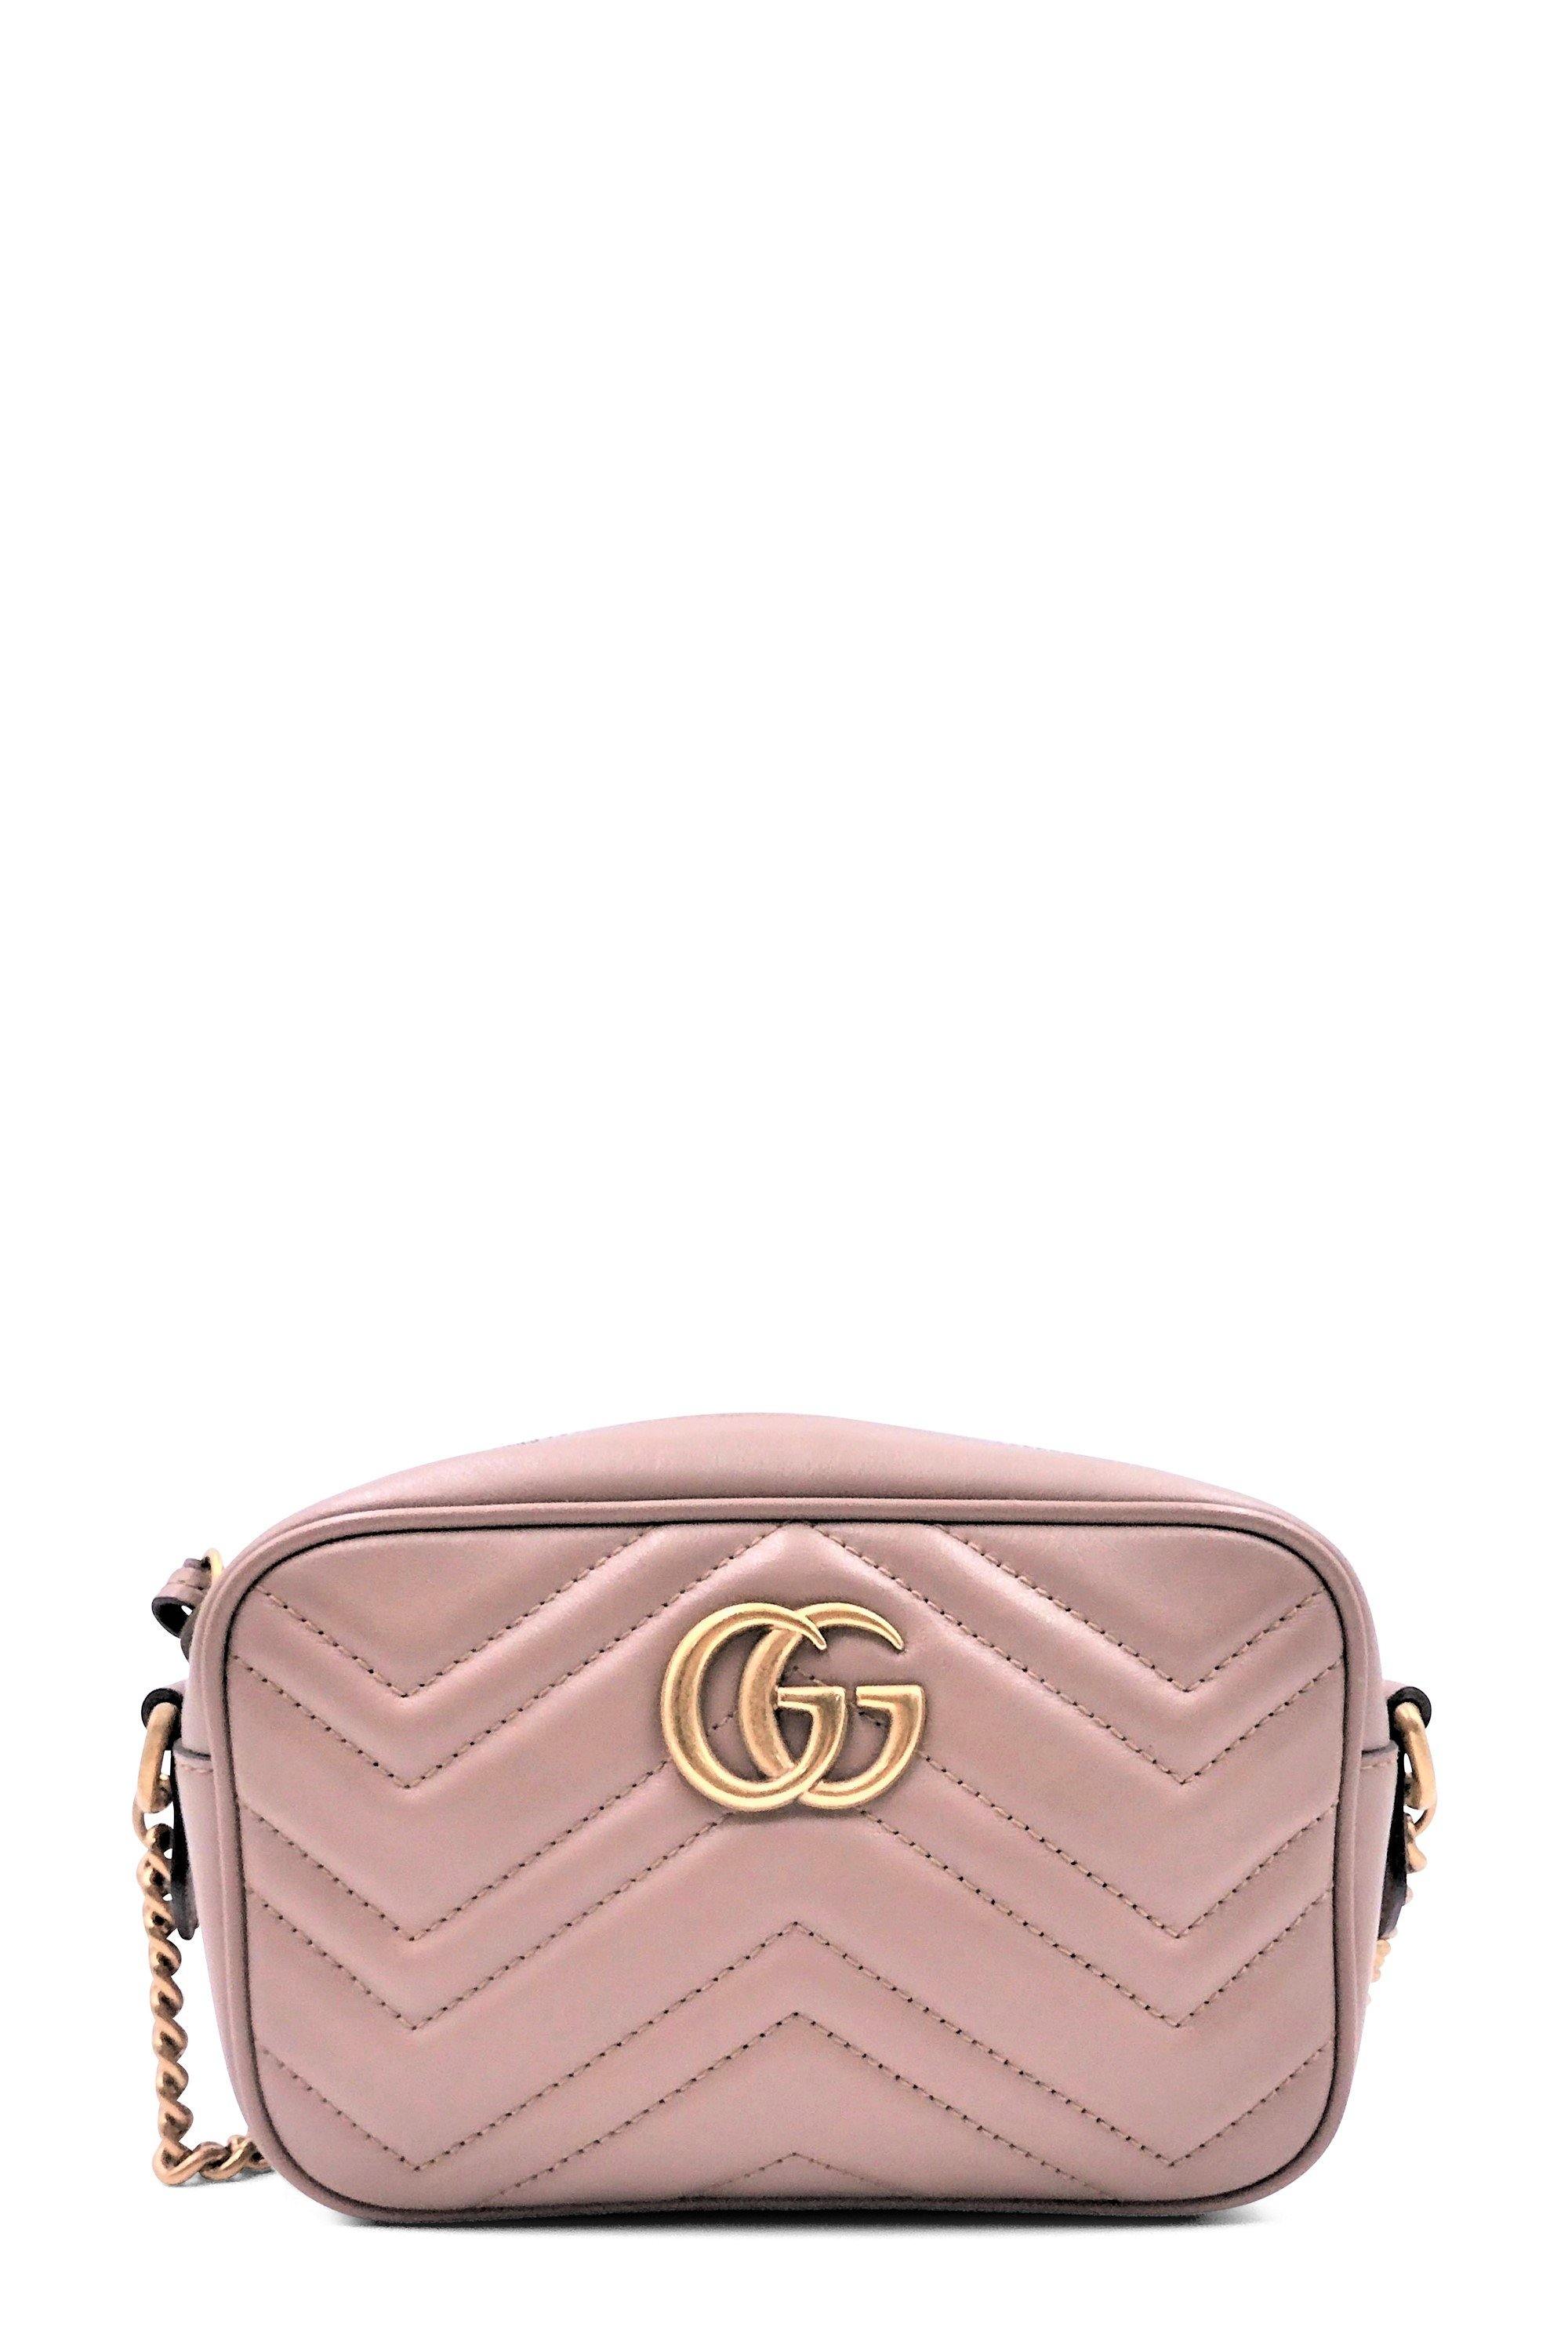 Buy Authentic, Preloved Gucci GG Marmont Matelasse Mini Bag Dusty Pink Bags  from Second Edit by Style Theory